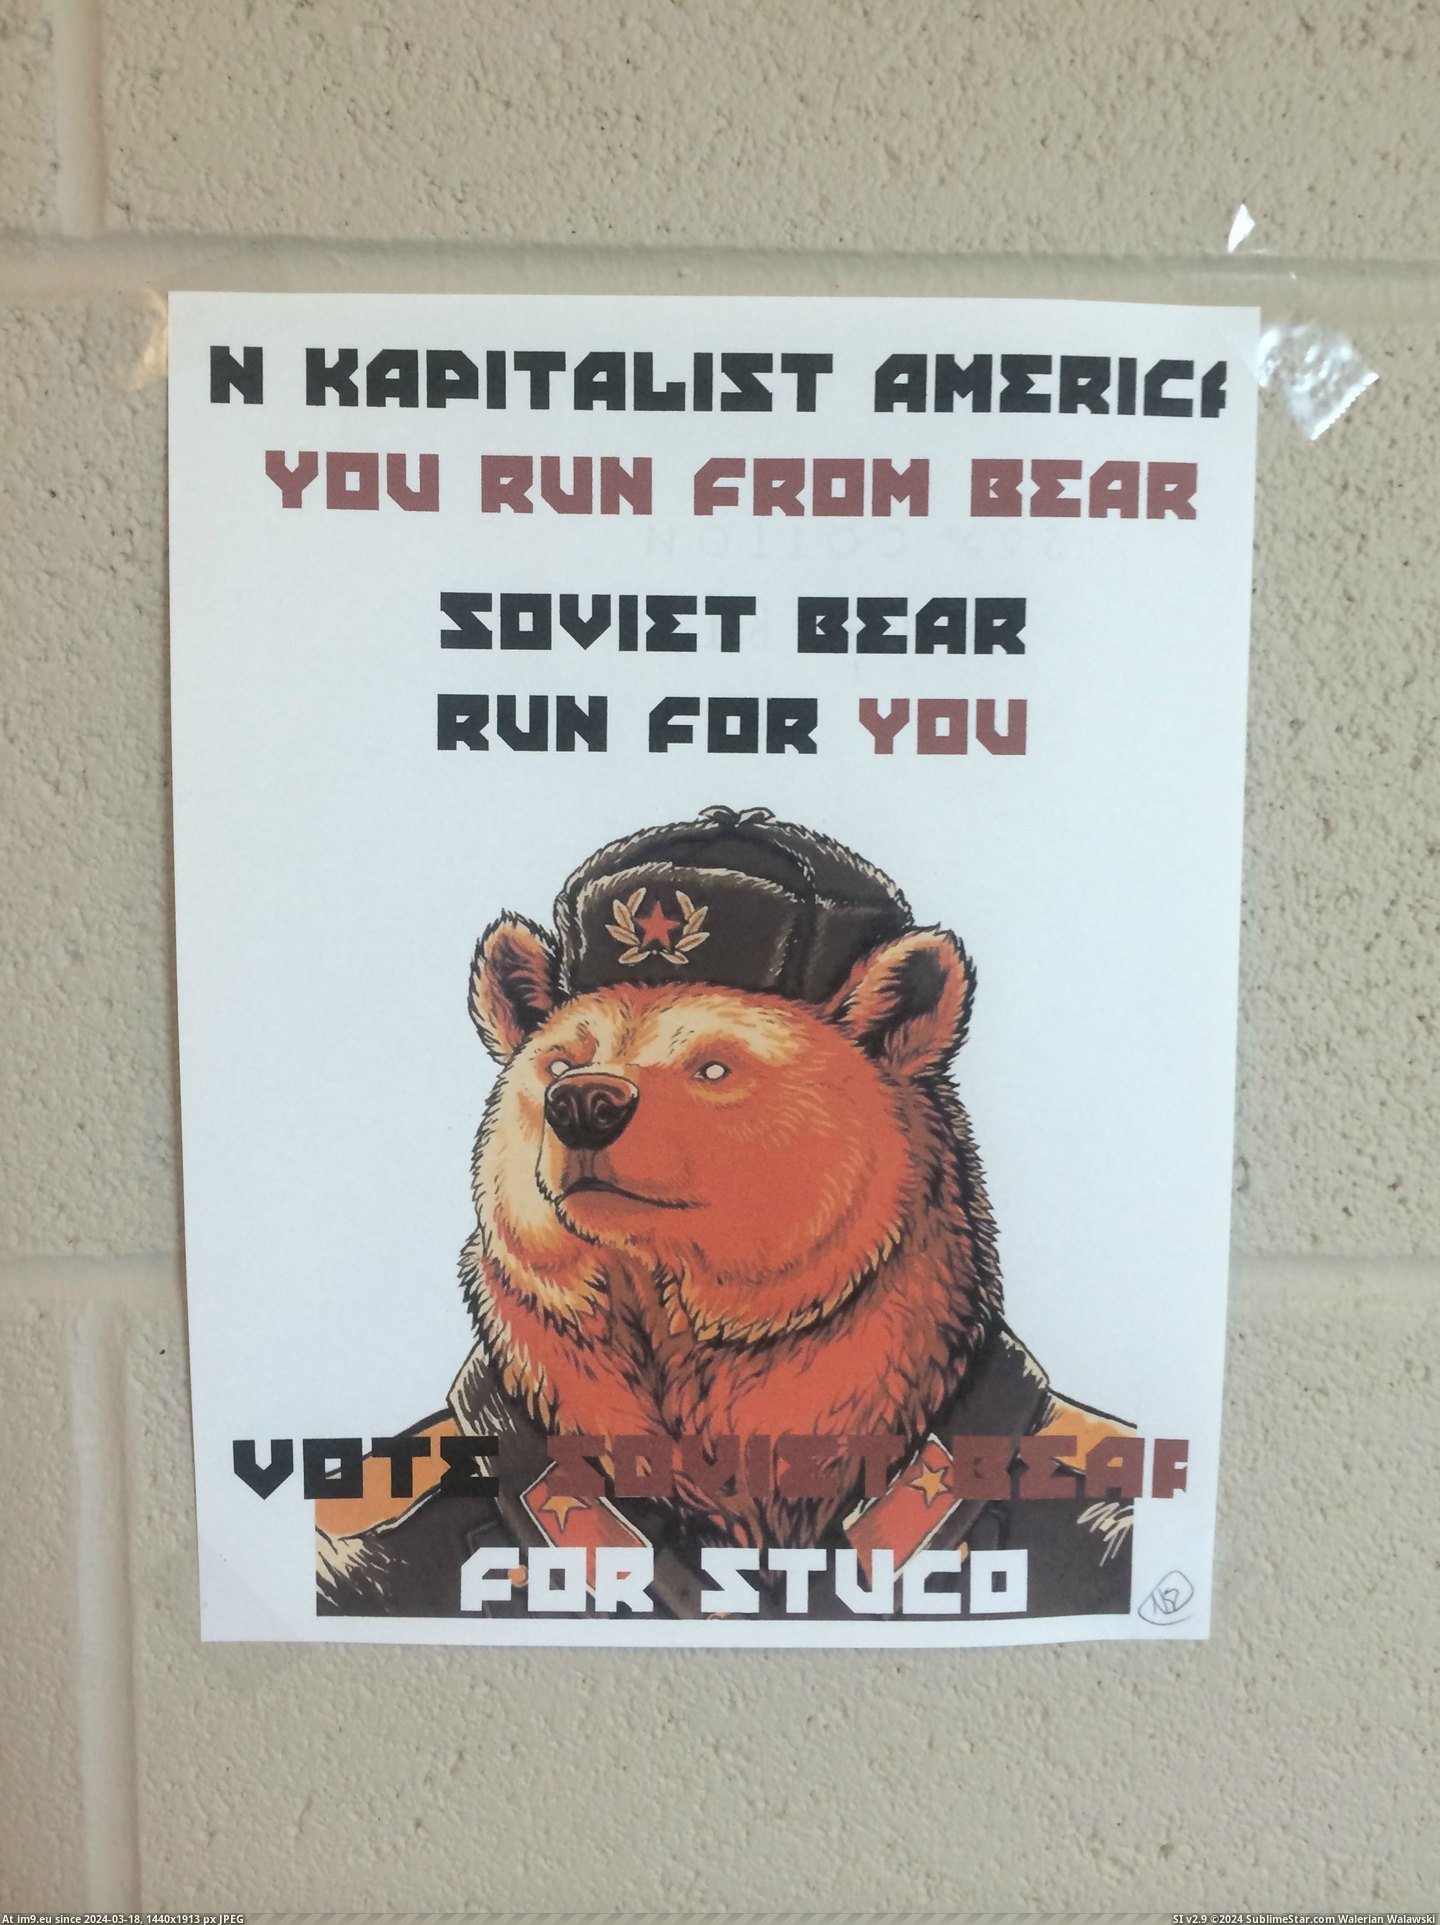 #Funny #School #Decided #Holding #Soviet #Council #Elections #Bear #Student #Run [Funny] So my school is holding elections for student council... and someone has decided to run as Soviet Bear 12 Pic. (Bild von album My r/FUNNY favs))